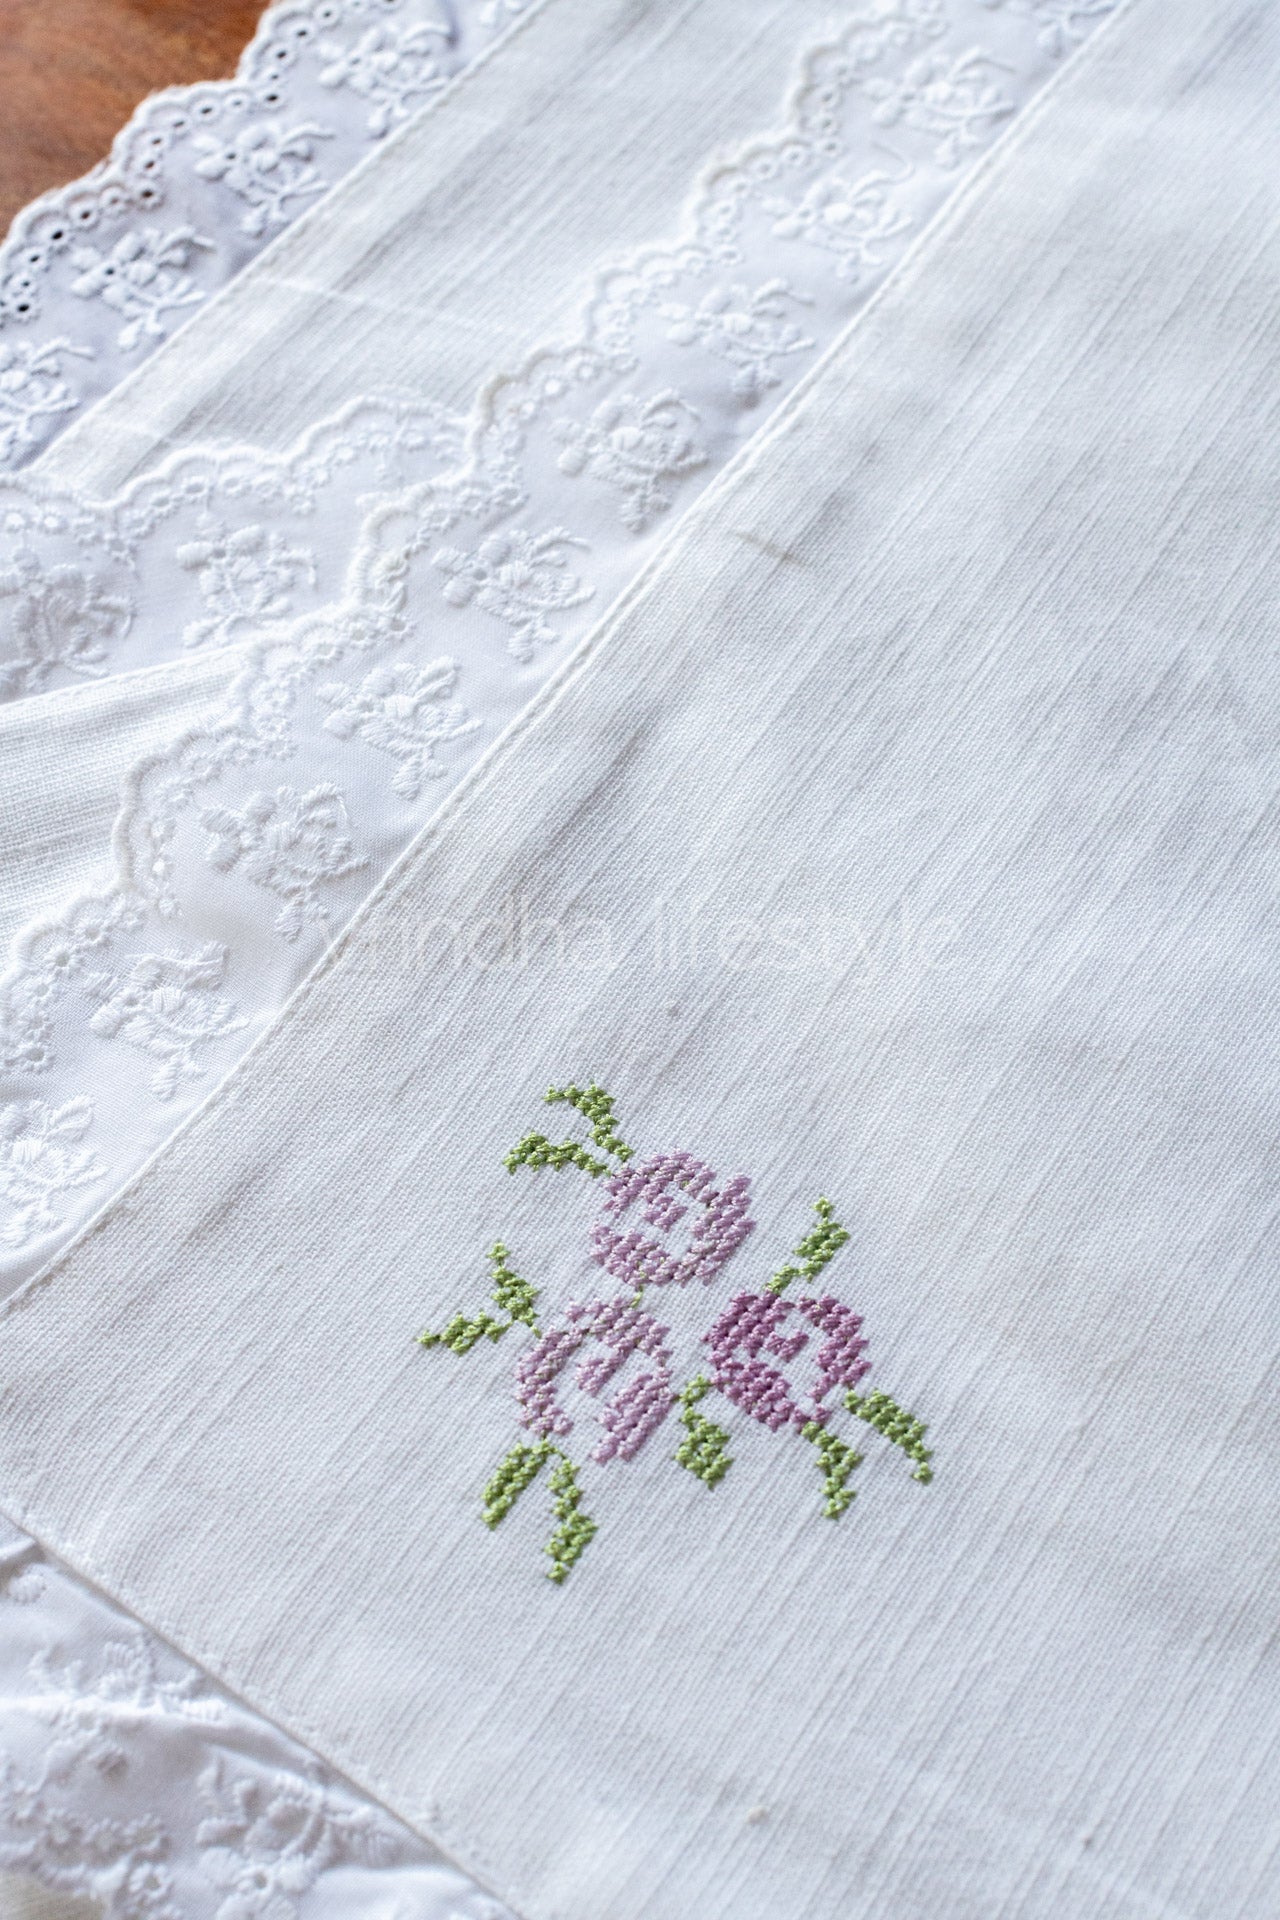 Embroidered place mat with lace detailing_single unit